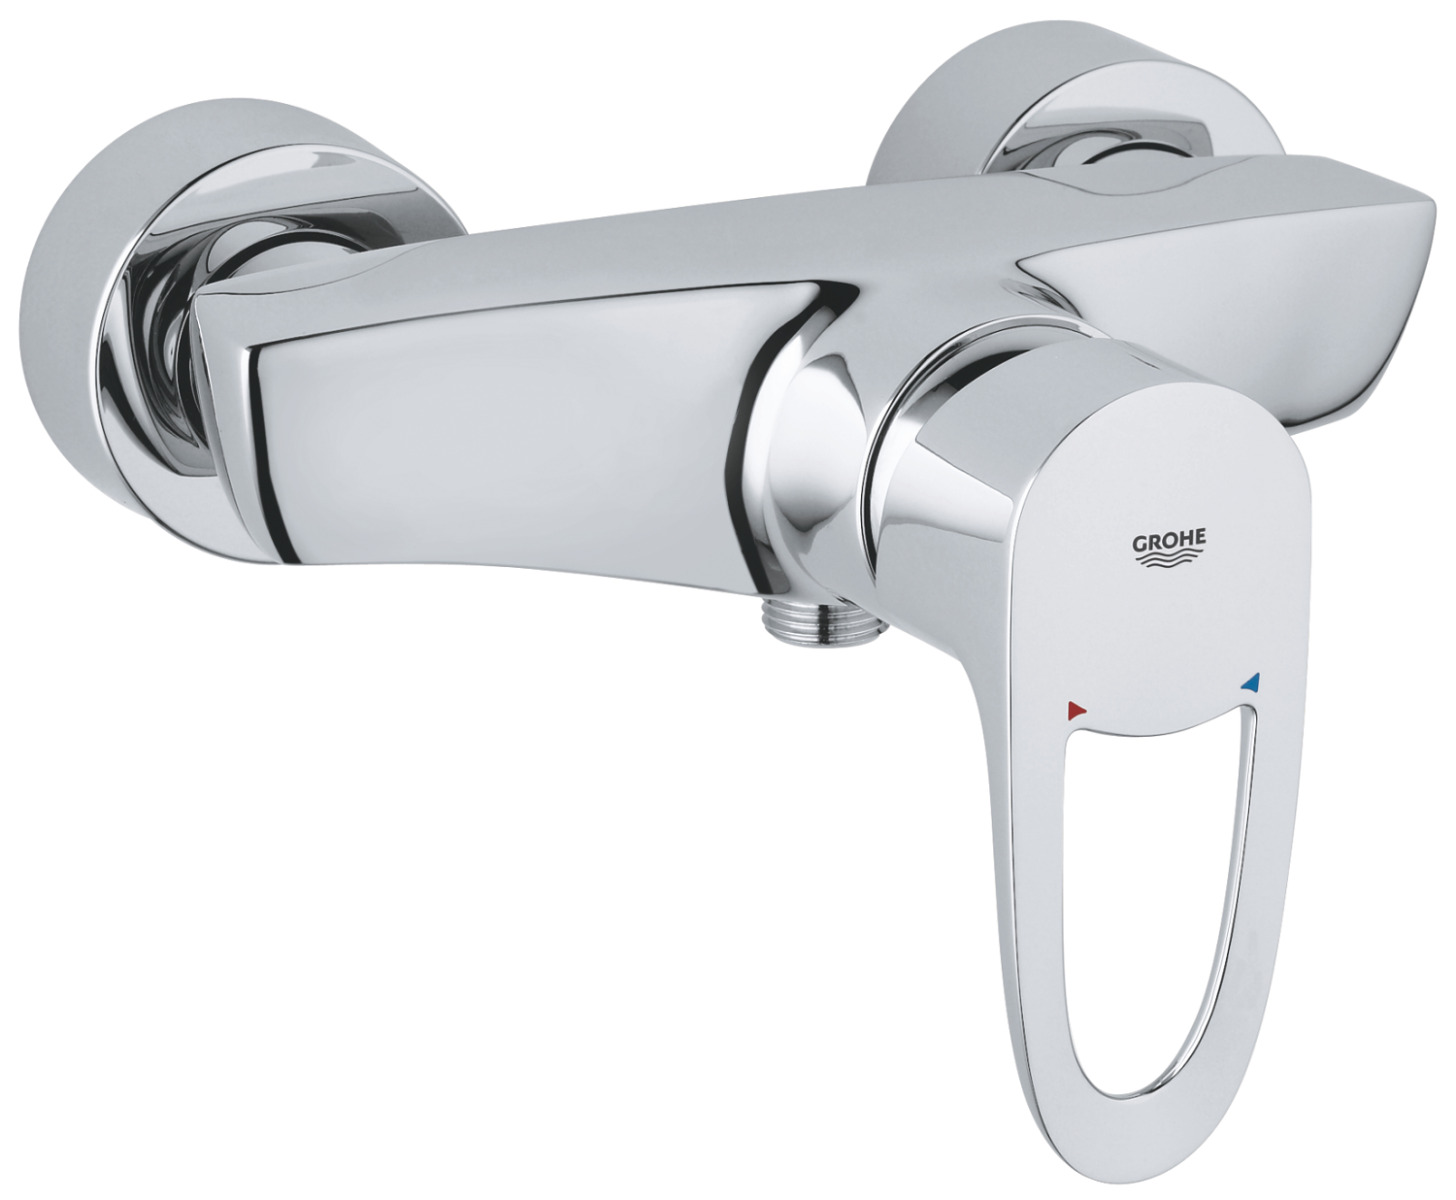 Baterie dus Grohe Europlus, montare pe perete,crom-33577001 baterii-lux.ro